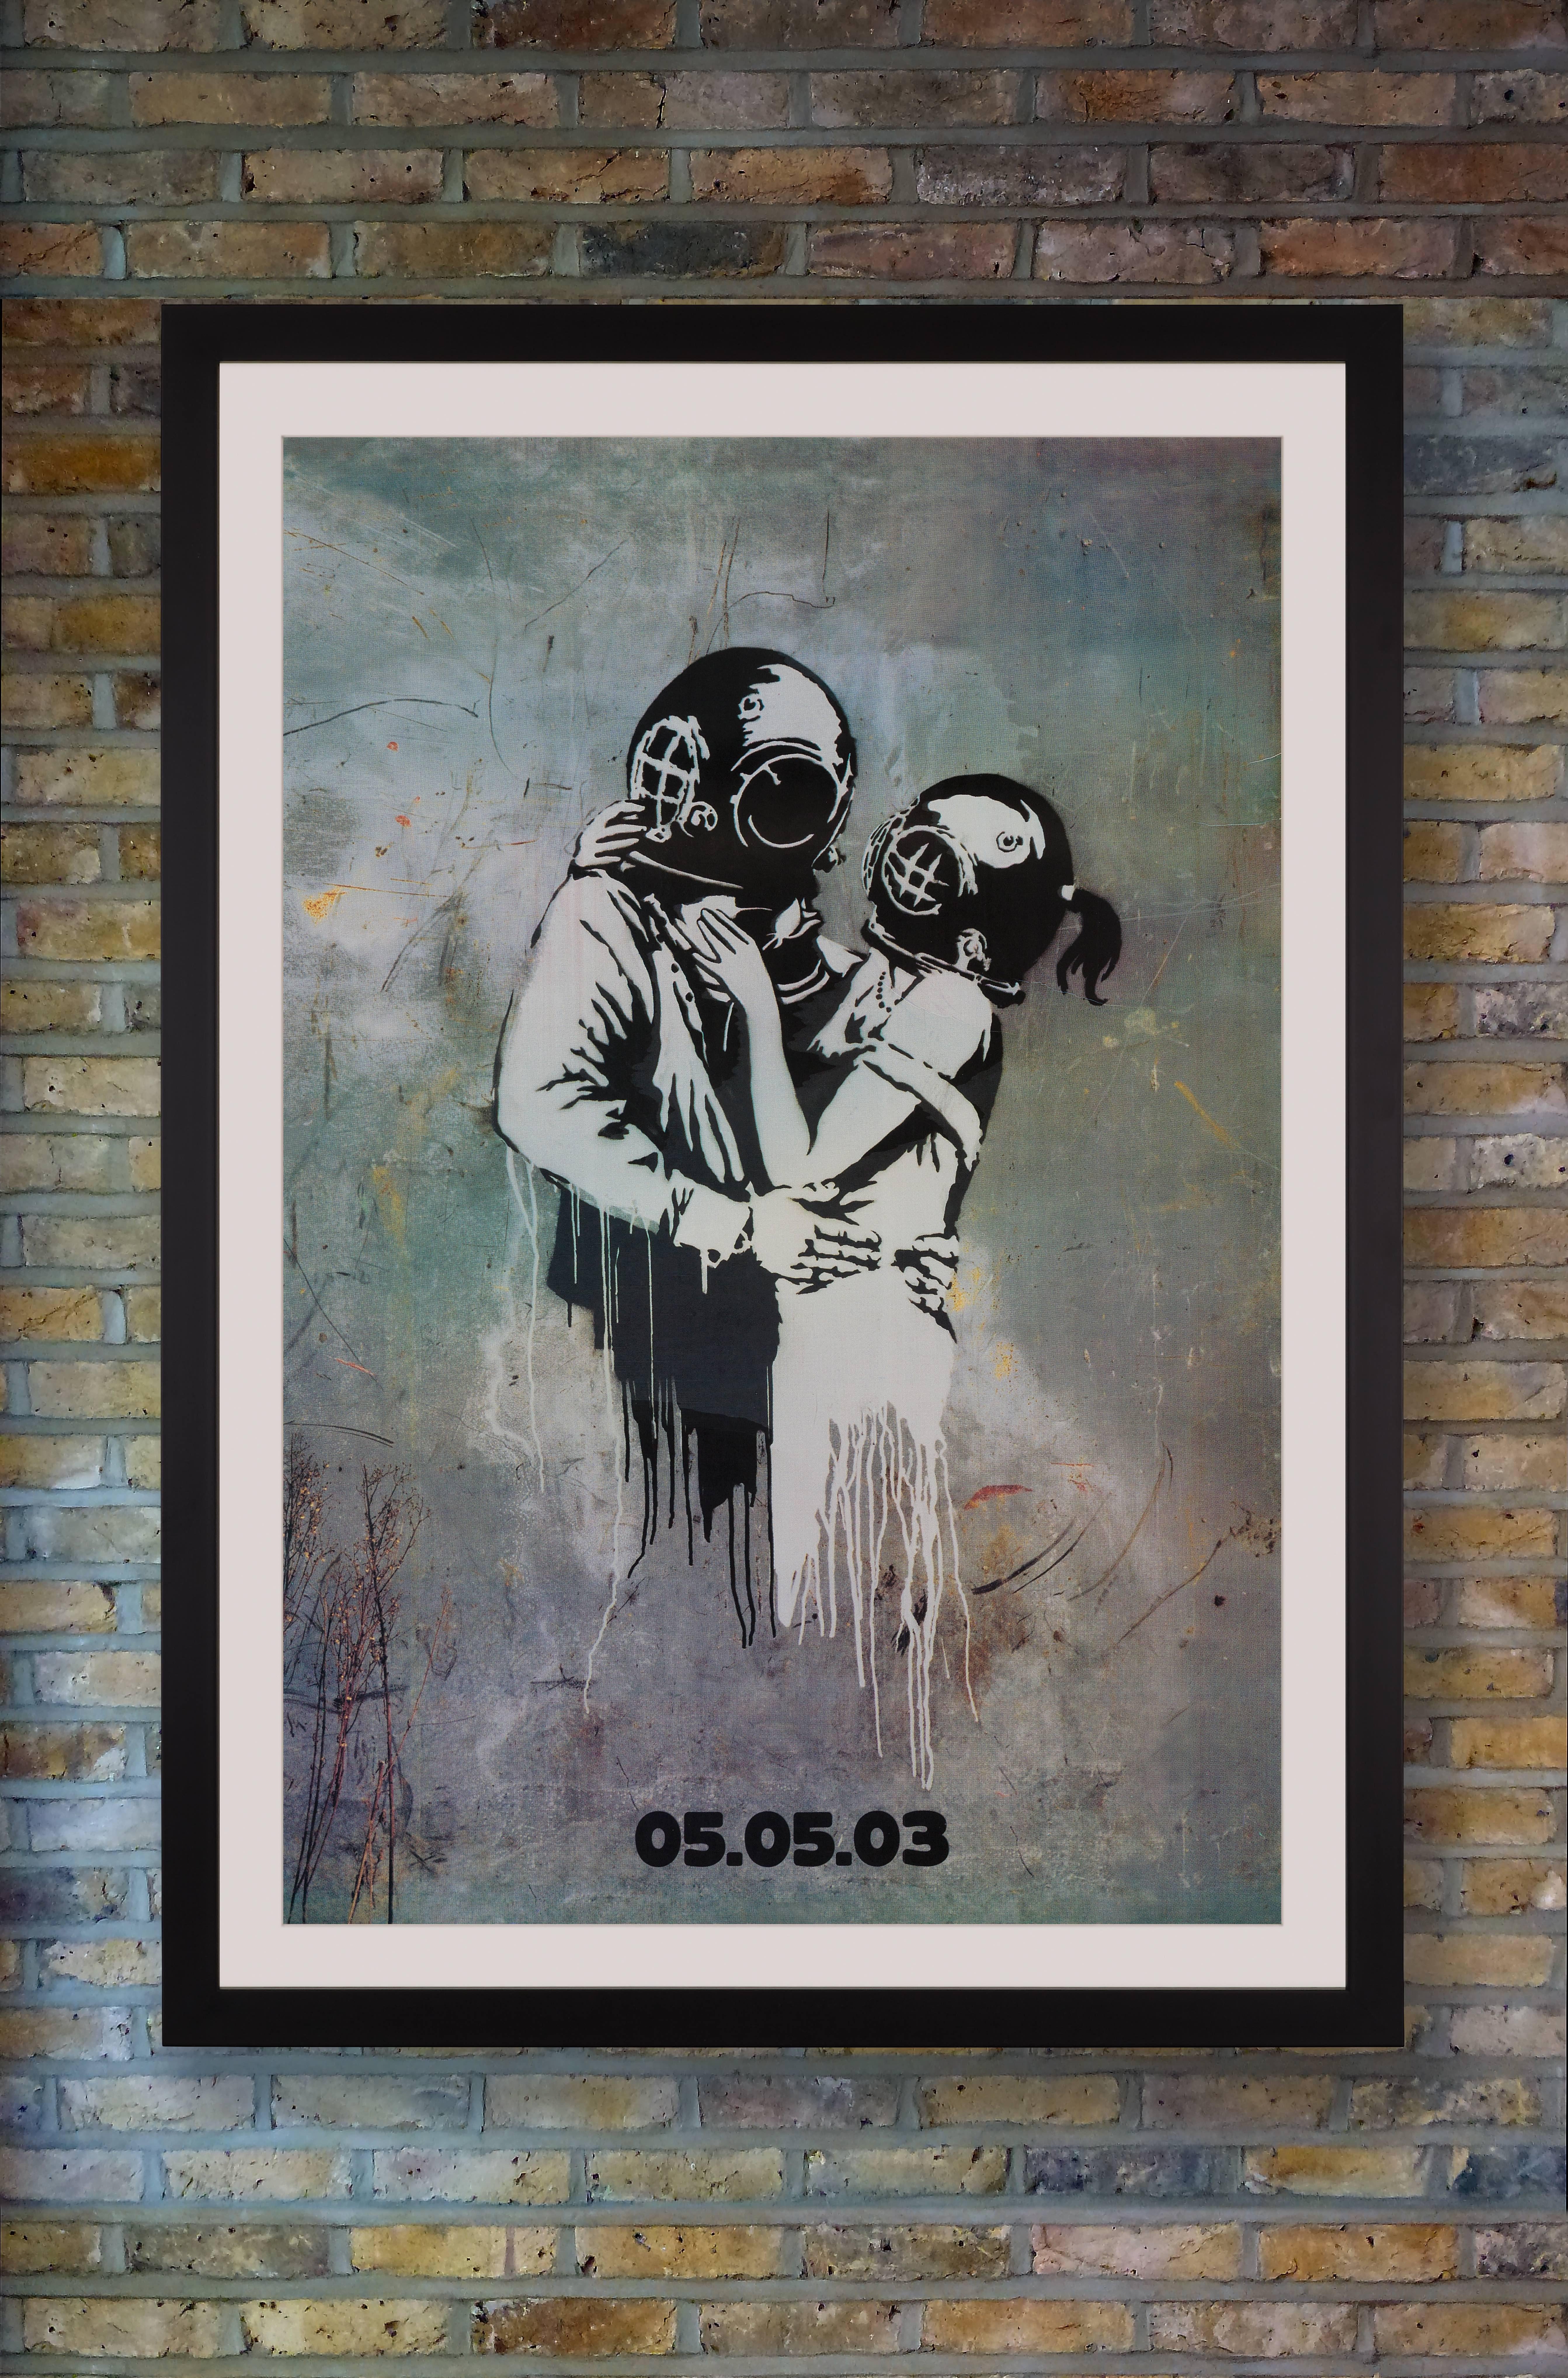 An oversized UK promotional poster by anonymous street artist Banksy for the 2003 release of Britpop band Blur's seventh studio album 'Think Tank.' In a rare foray into commercial work for the elusive Banksy, he created designs for the entire